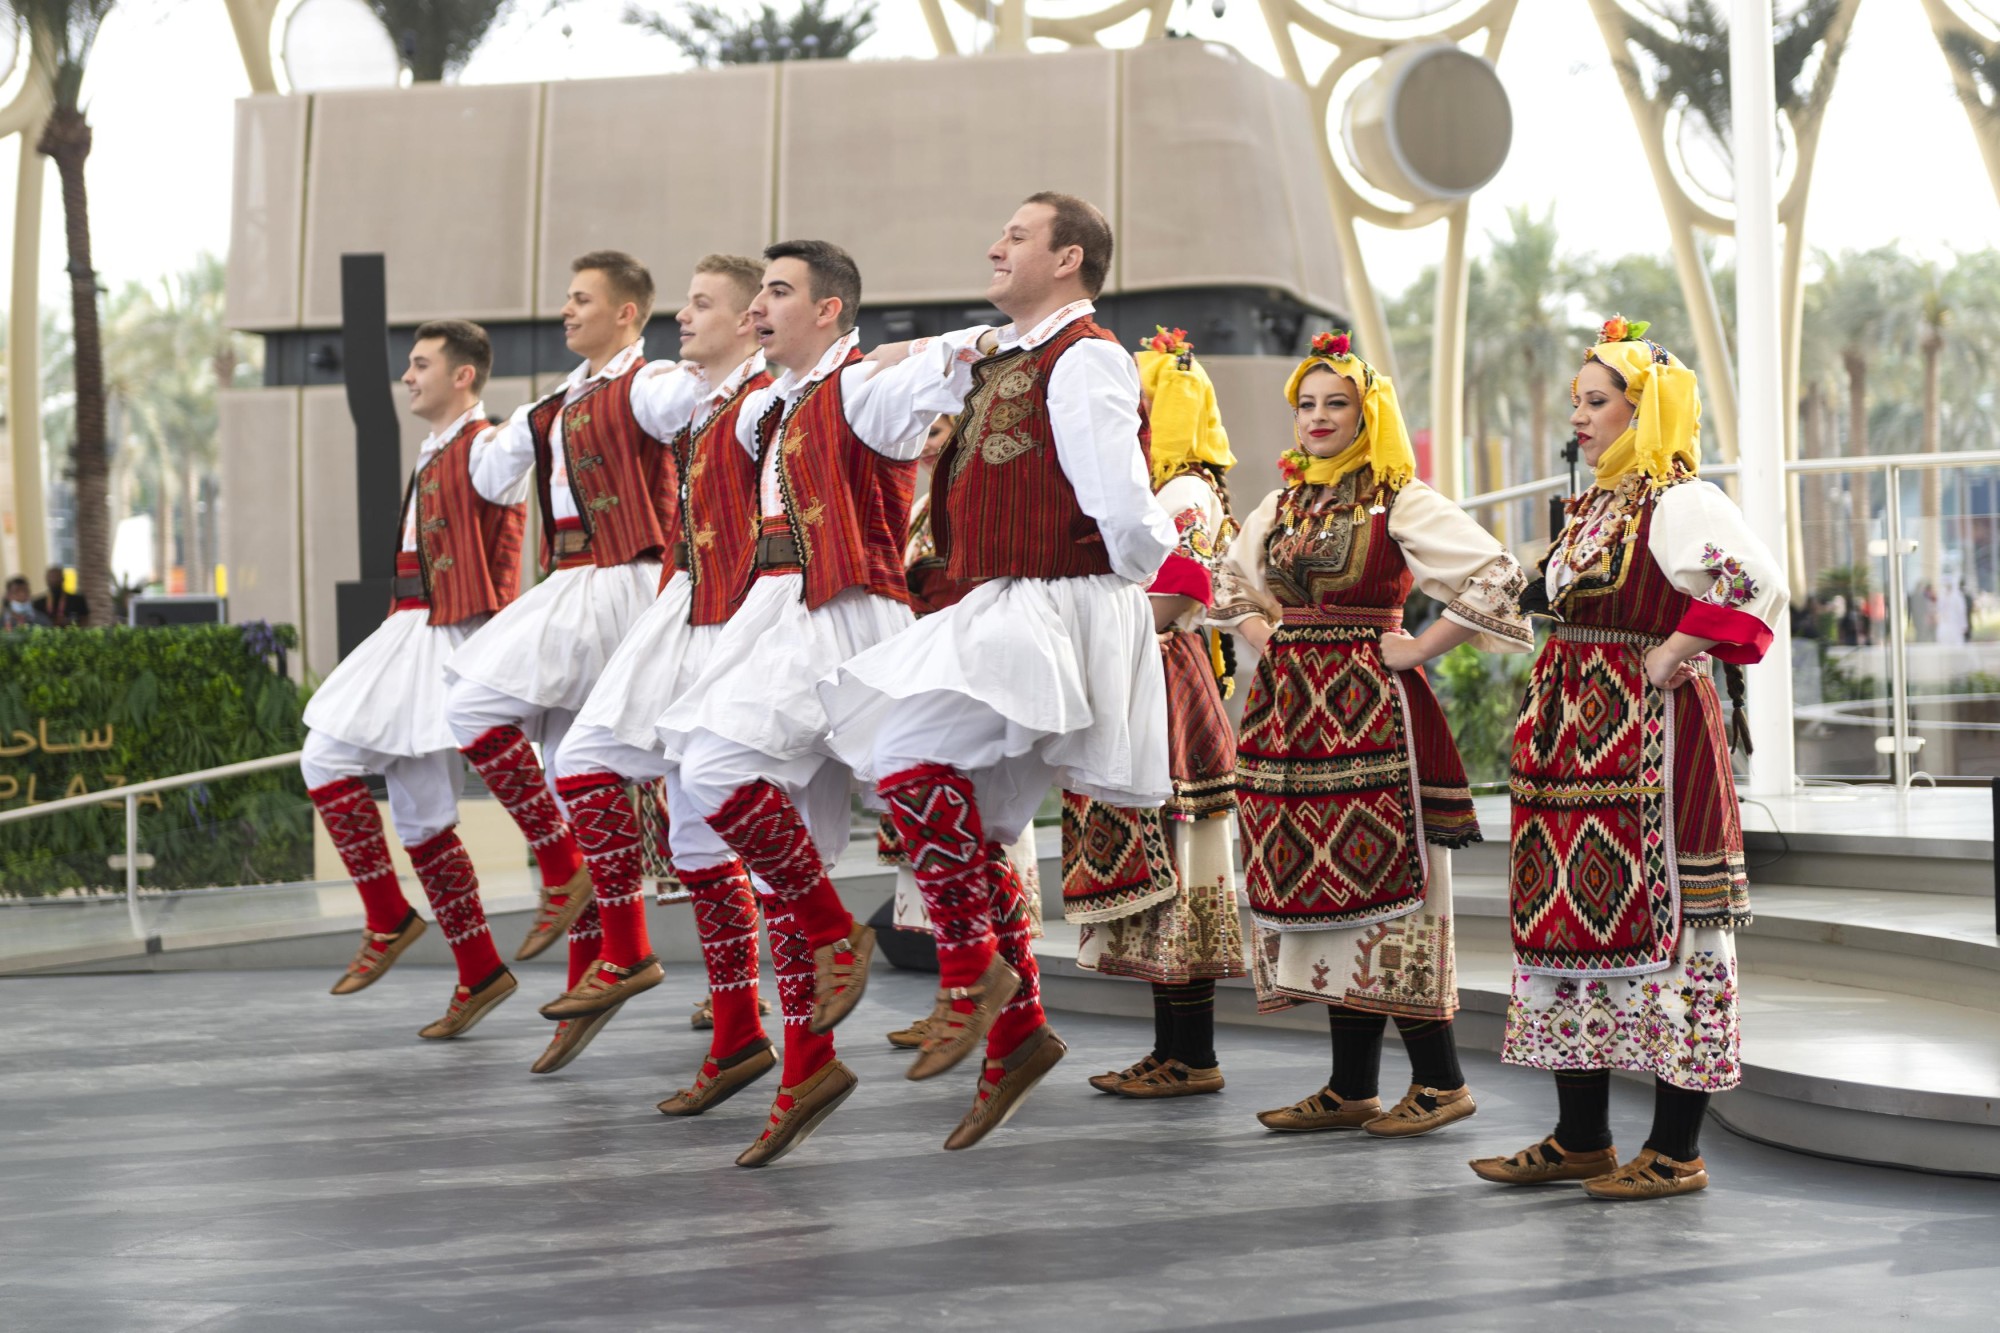 Cultural performance during the North Macedonia National Day Ceremony at Al Wasl m53592